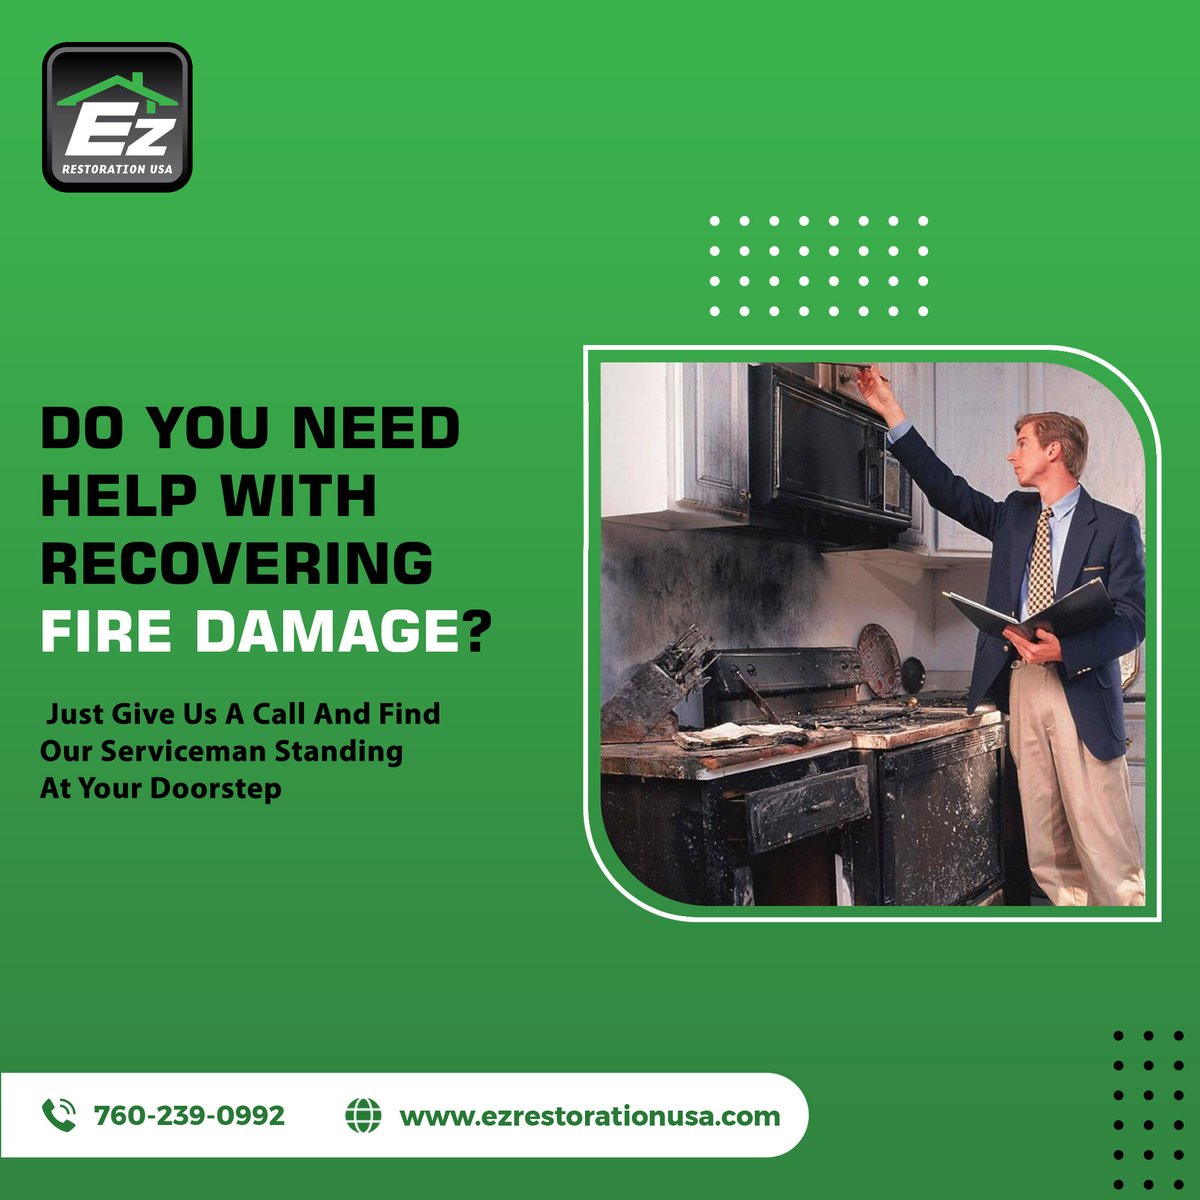 Allow us to drive you away from an emergency situation. Take support from our experts for restoring your property from a nasty fire or its severe damages. We’ll send a team immediately after receiving your request. 

#property #team #emergency #restoration #restorationservices https://t.co/W0vrZFYRfu